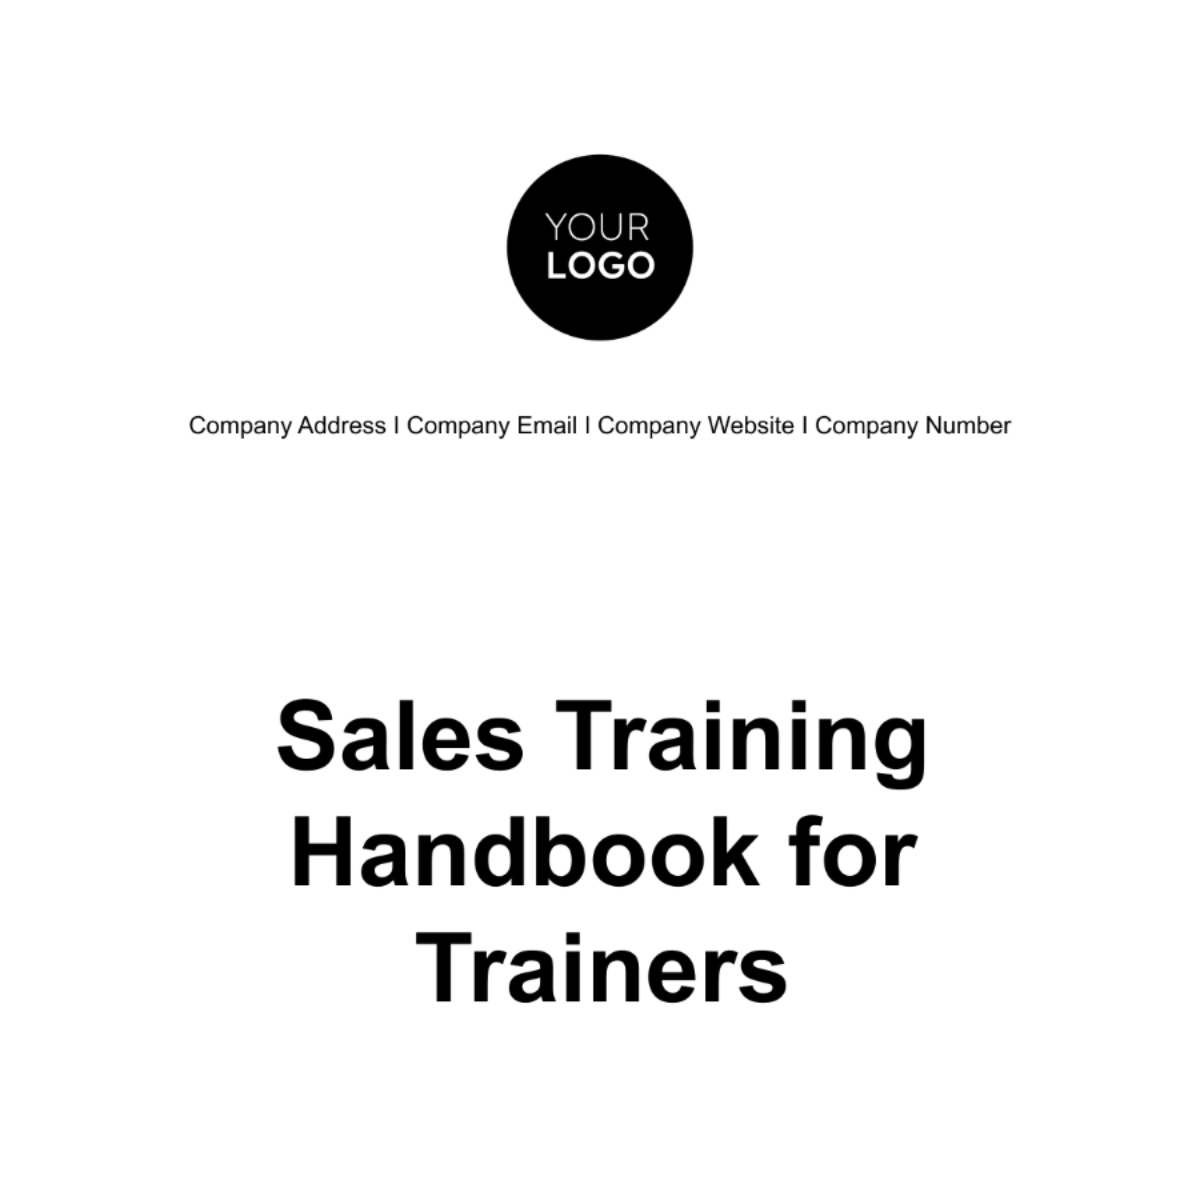 Free Sales Training Handbook for Trainers Template